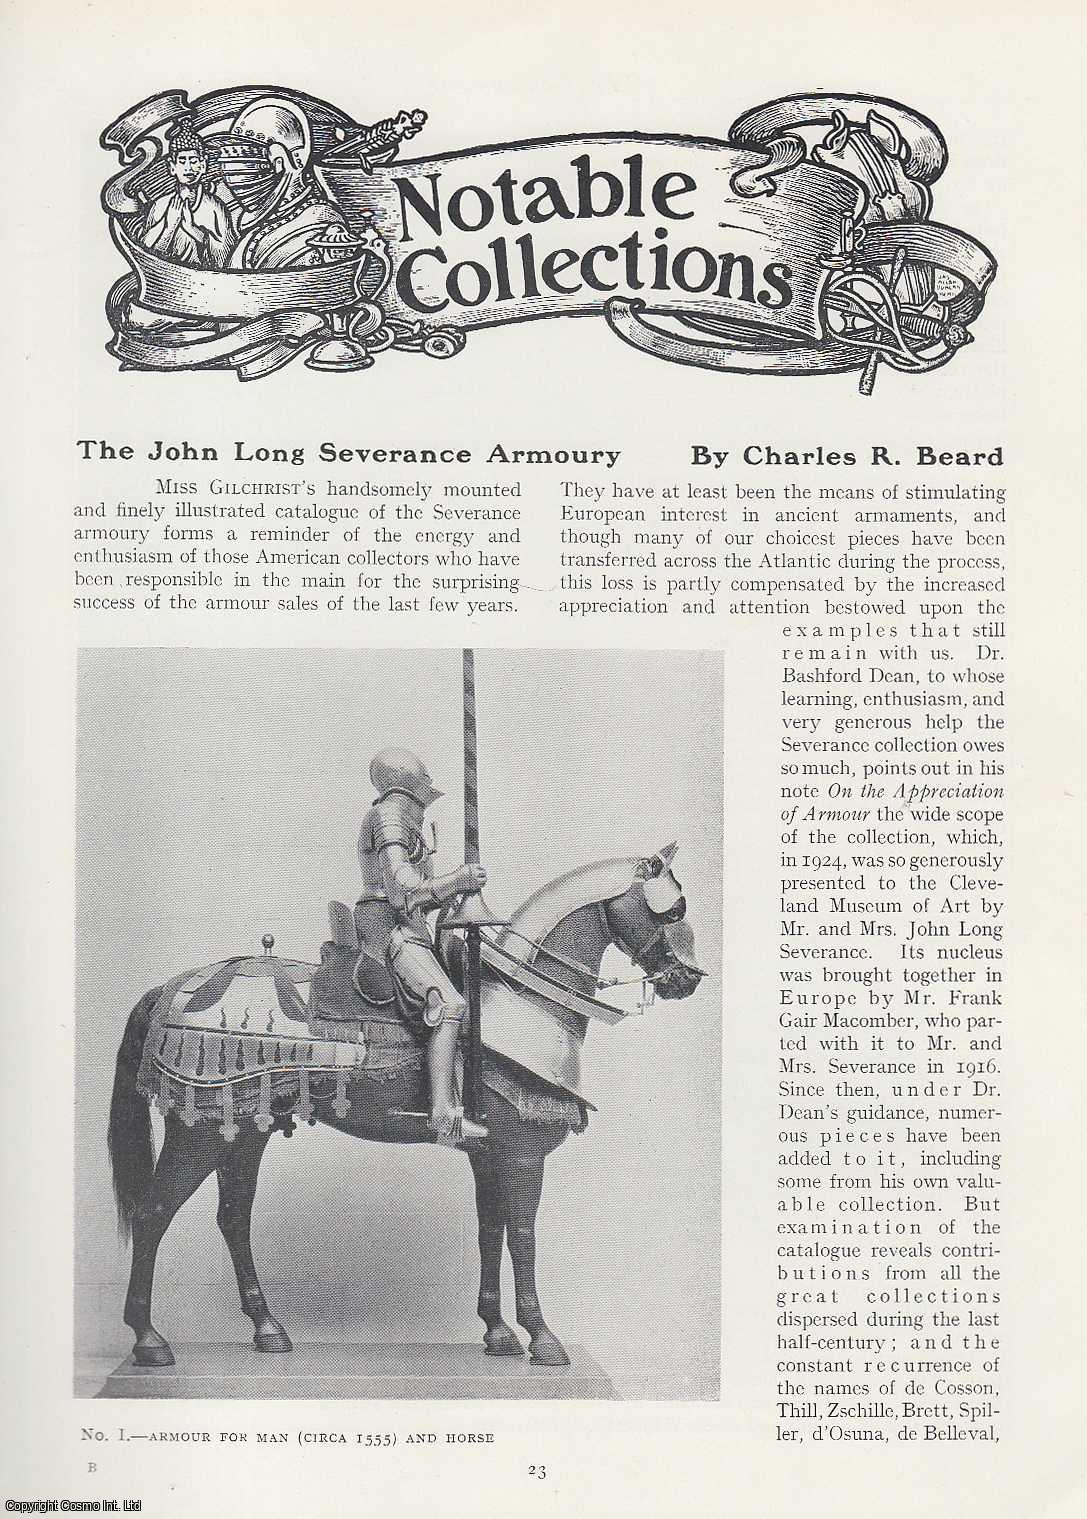 Charles R. Beard - The John Long Severance Armoury. An original article from The Connoisseur, 1925.